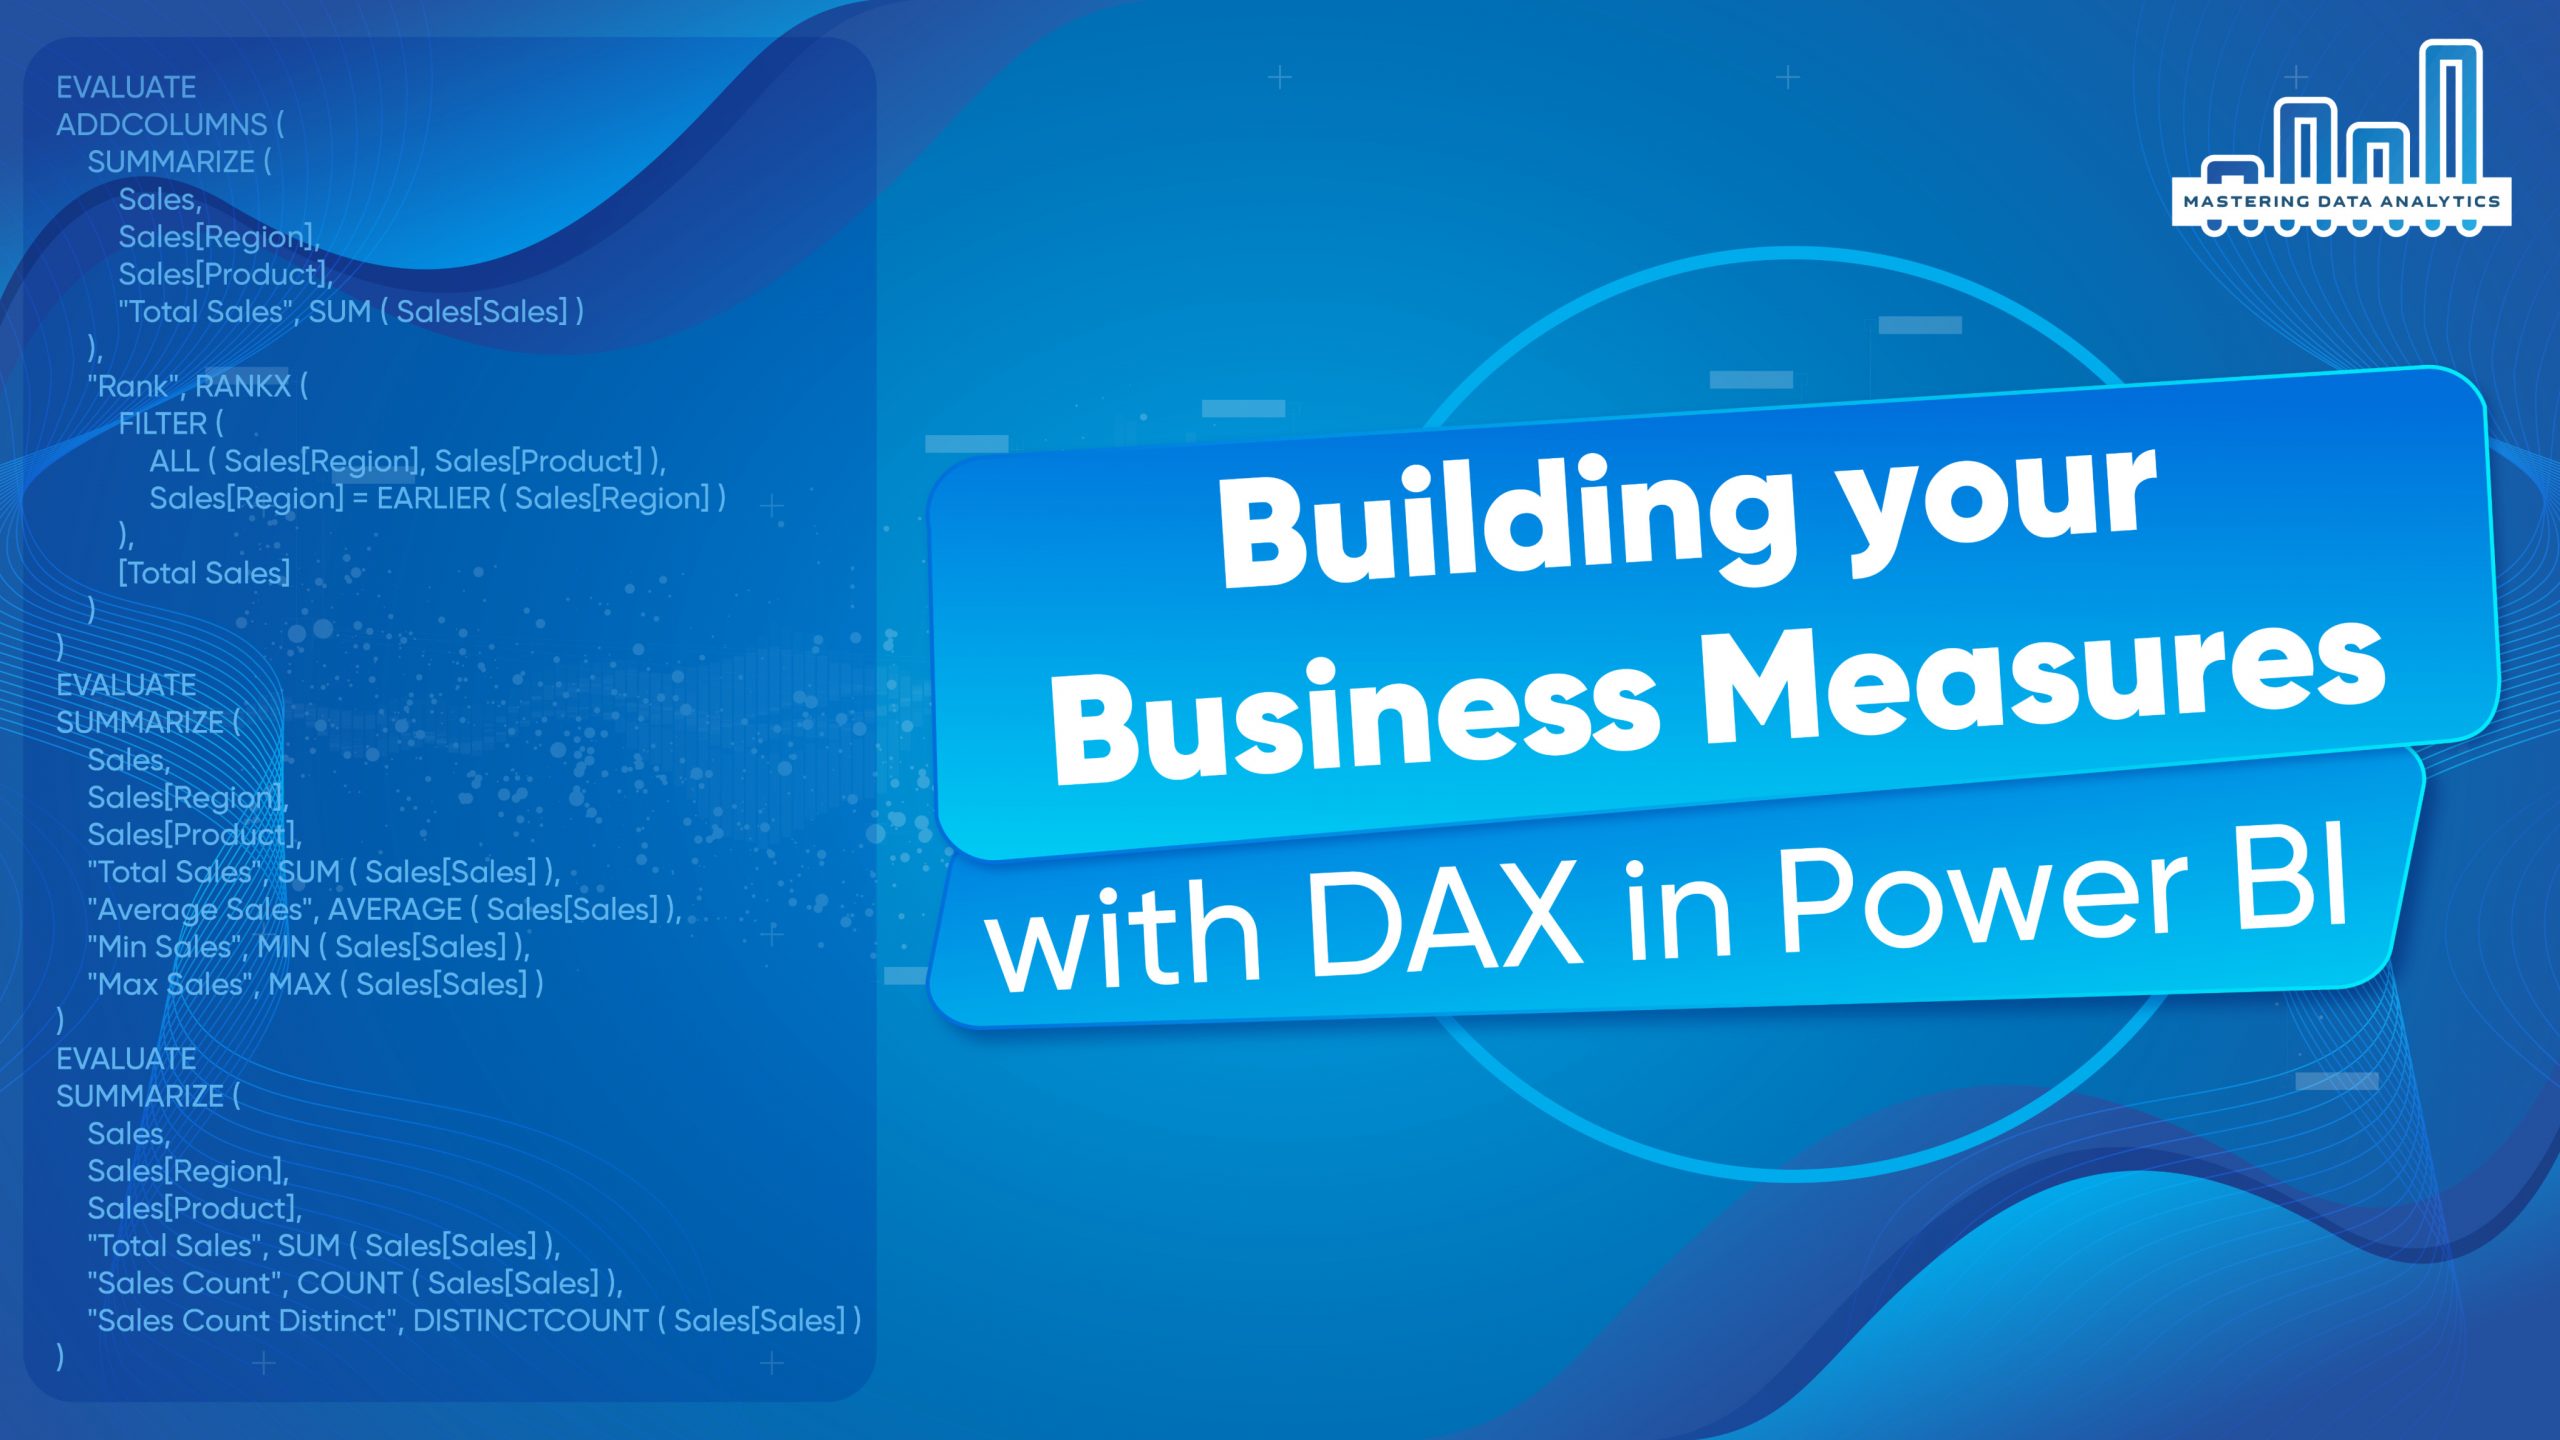 DAX – Building Your Business Measures